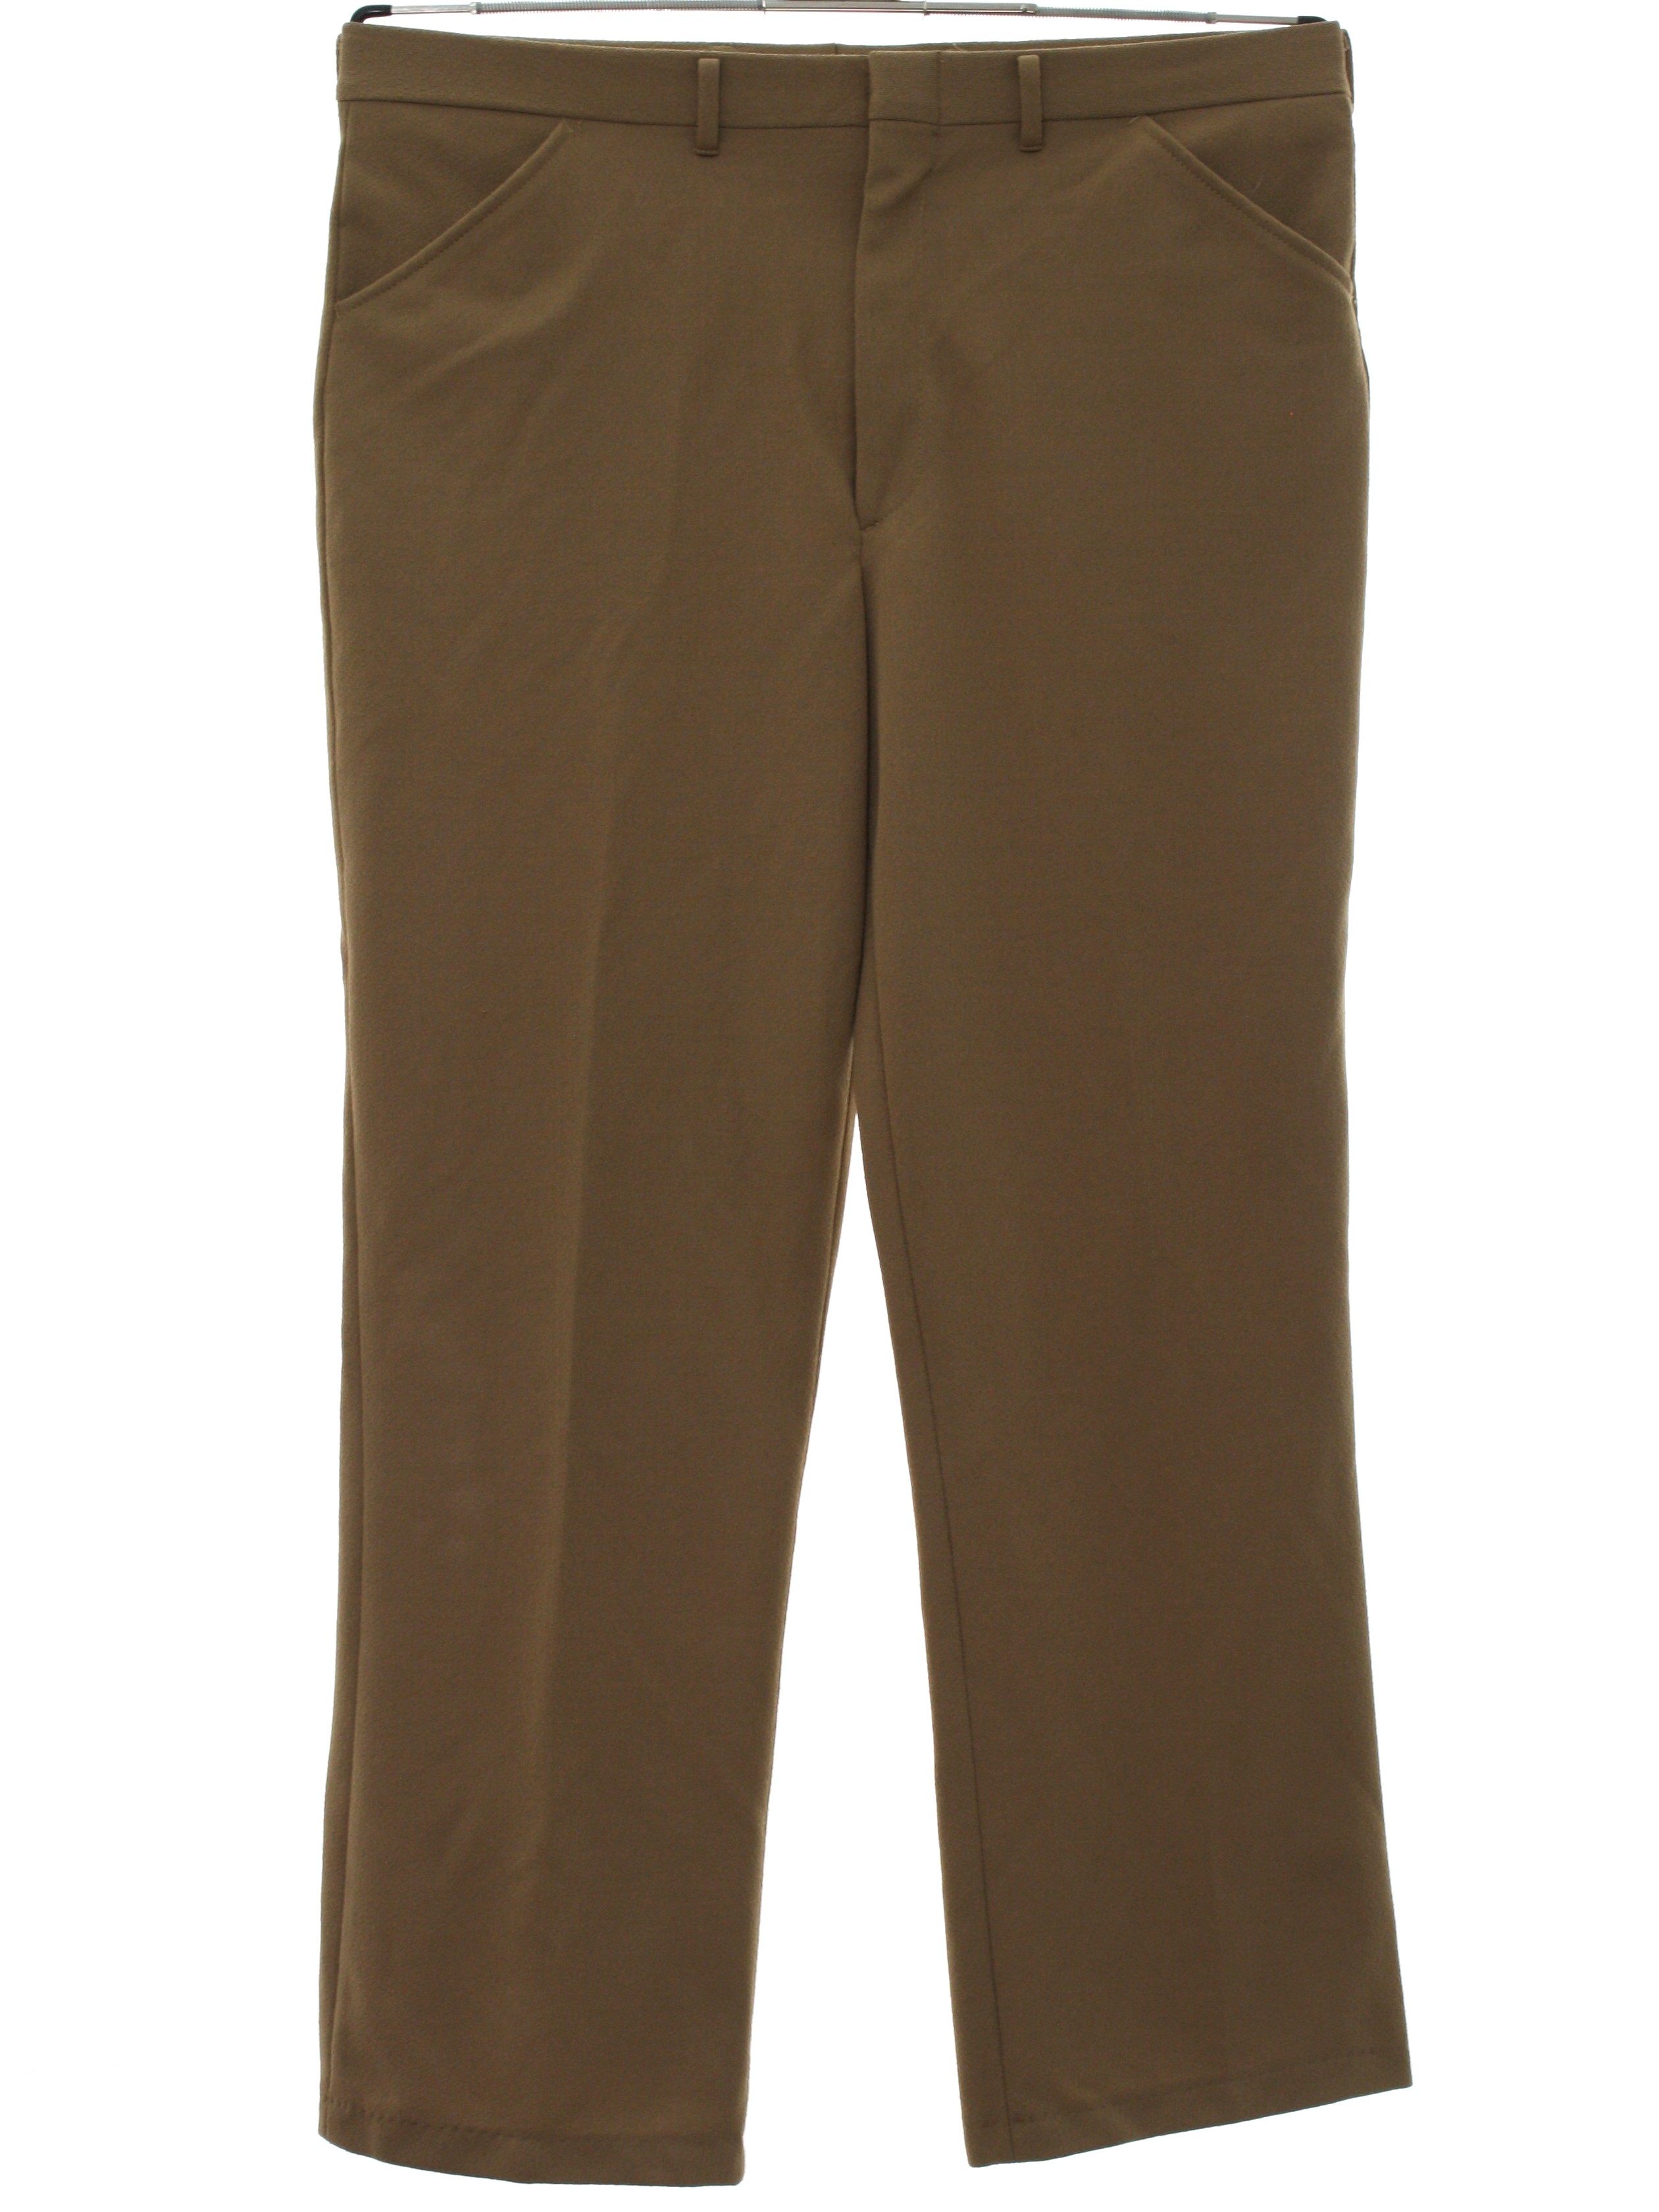 70's Haband Pants: 70s -Haband- Mens taupe solid colored polyester ...